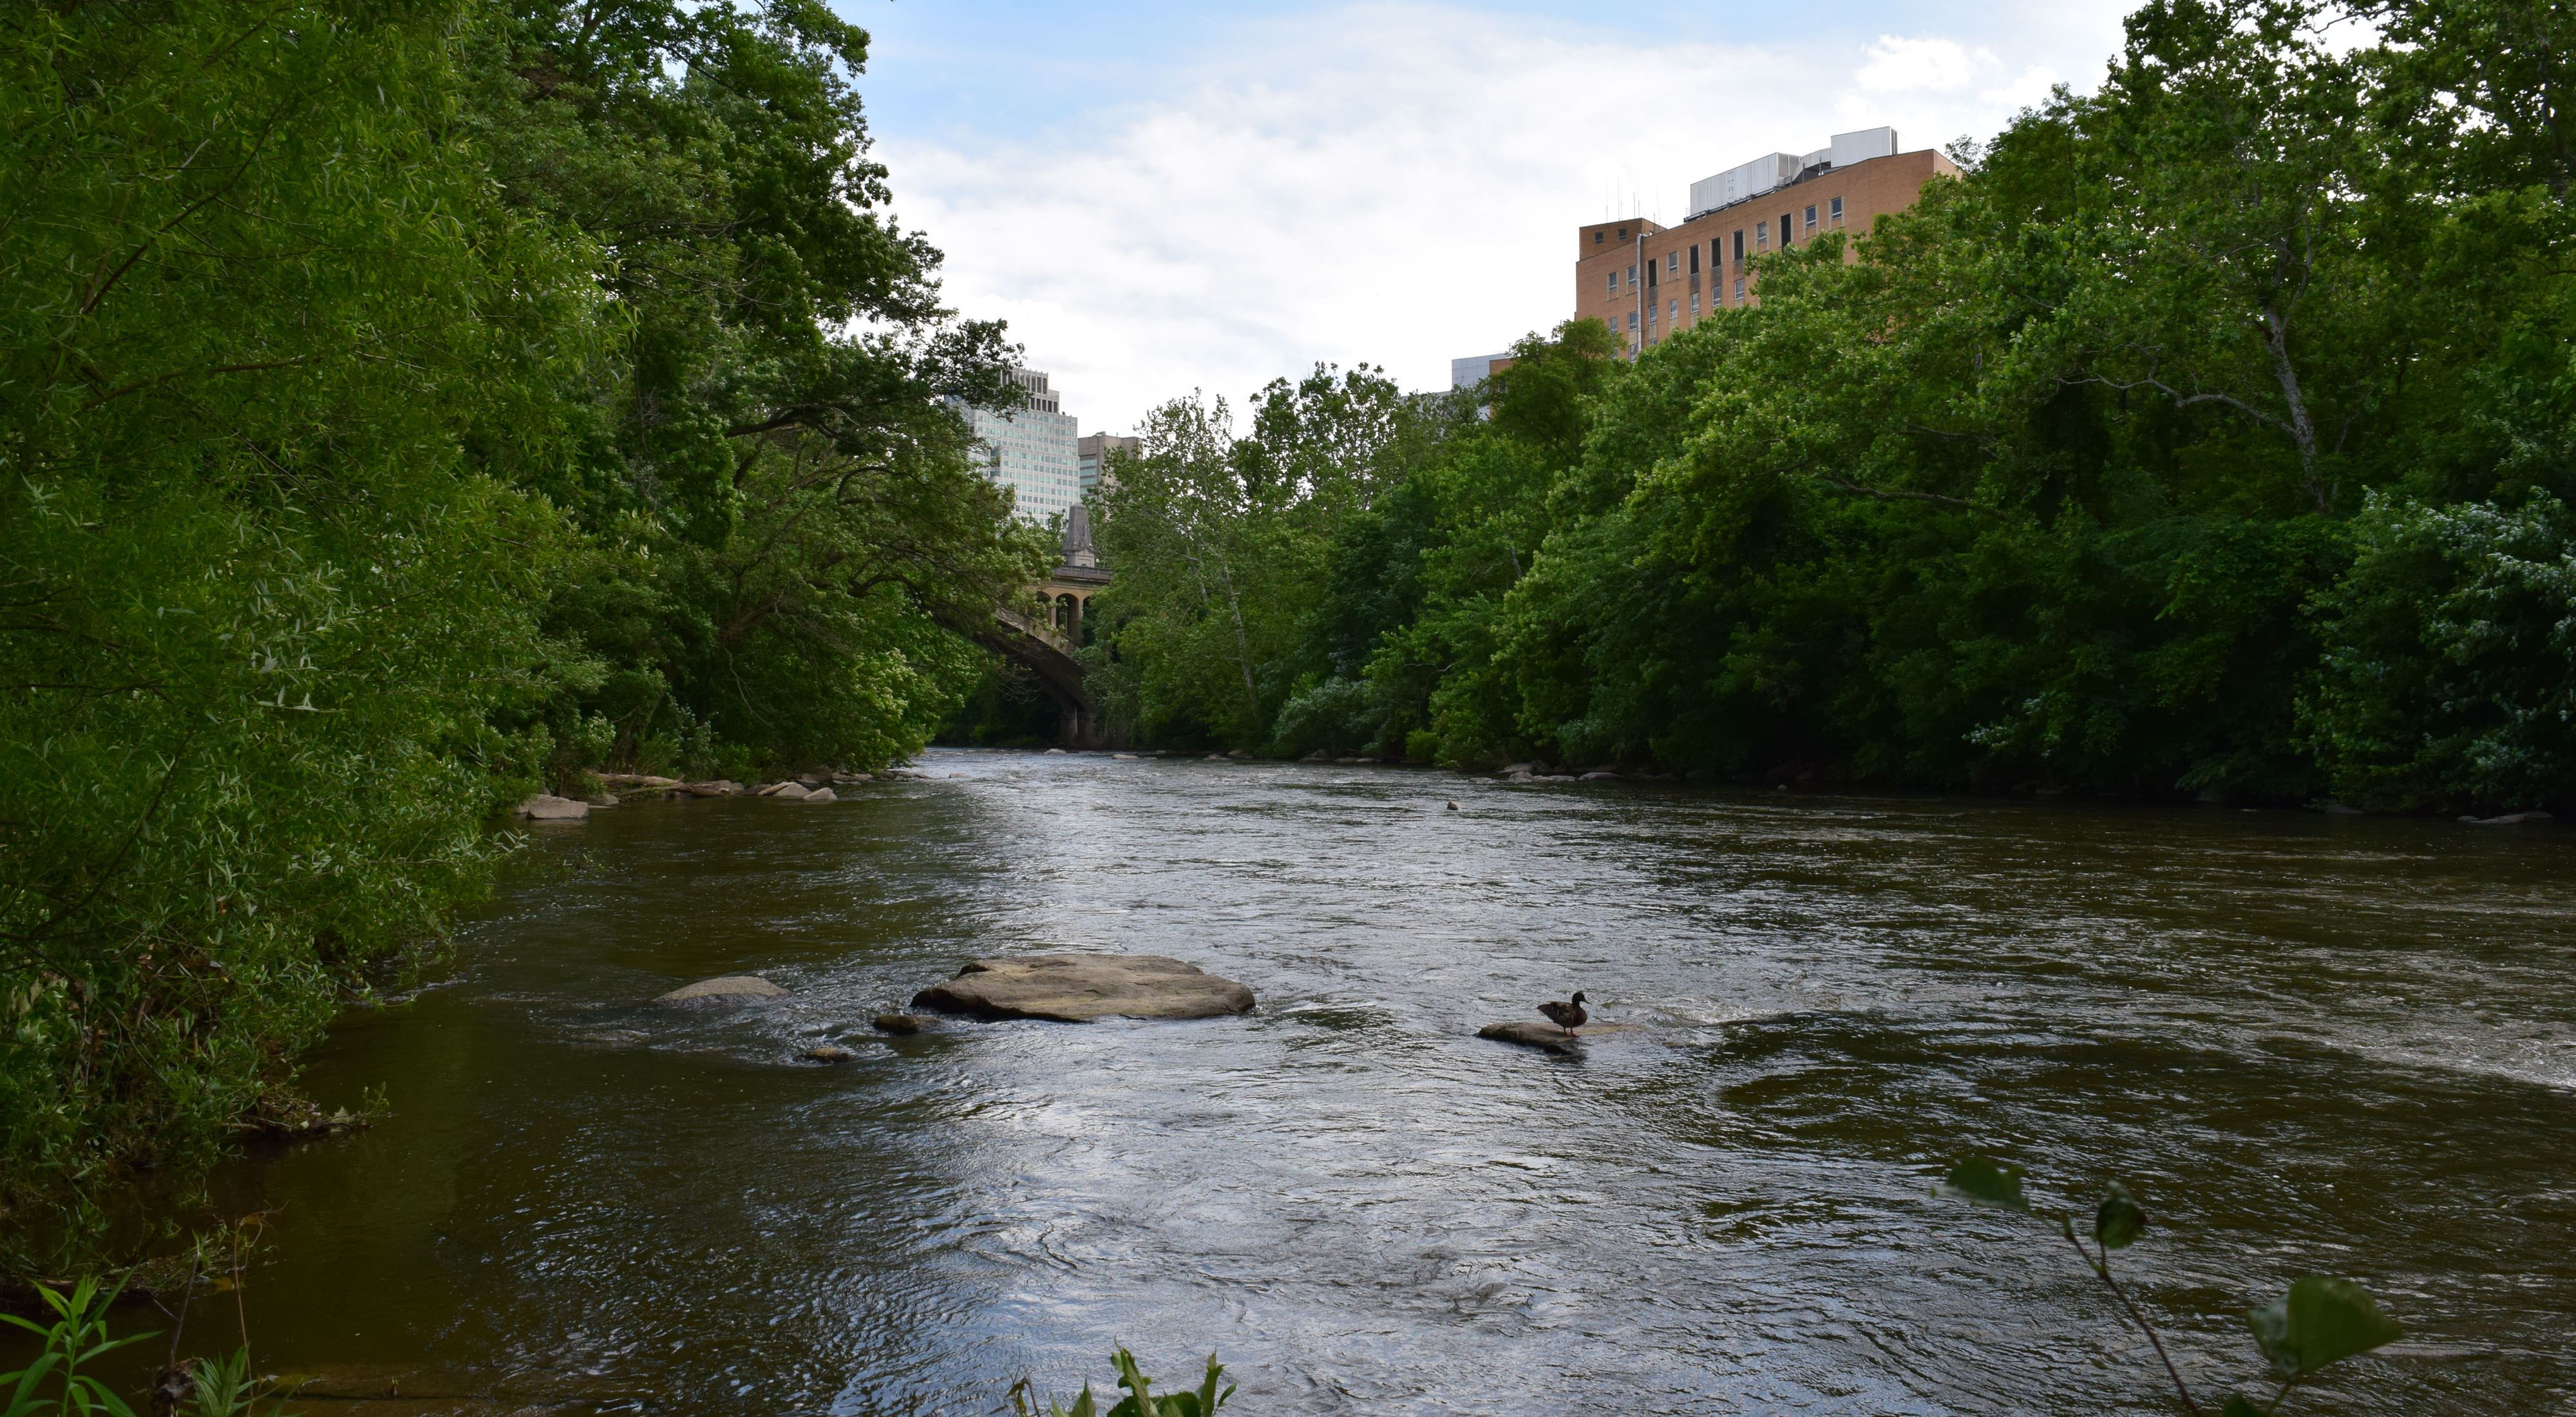 The Brandywine River flows between tree lined banks in the city of Wilmington, DE. An arched bridge spans the river in the background. City buildings rise behind the trees.